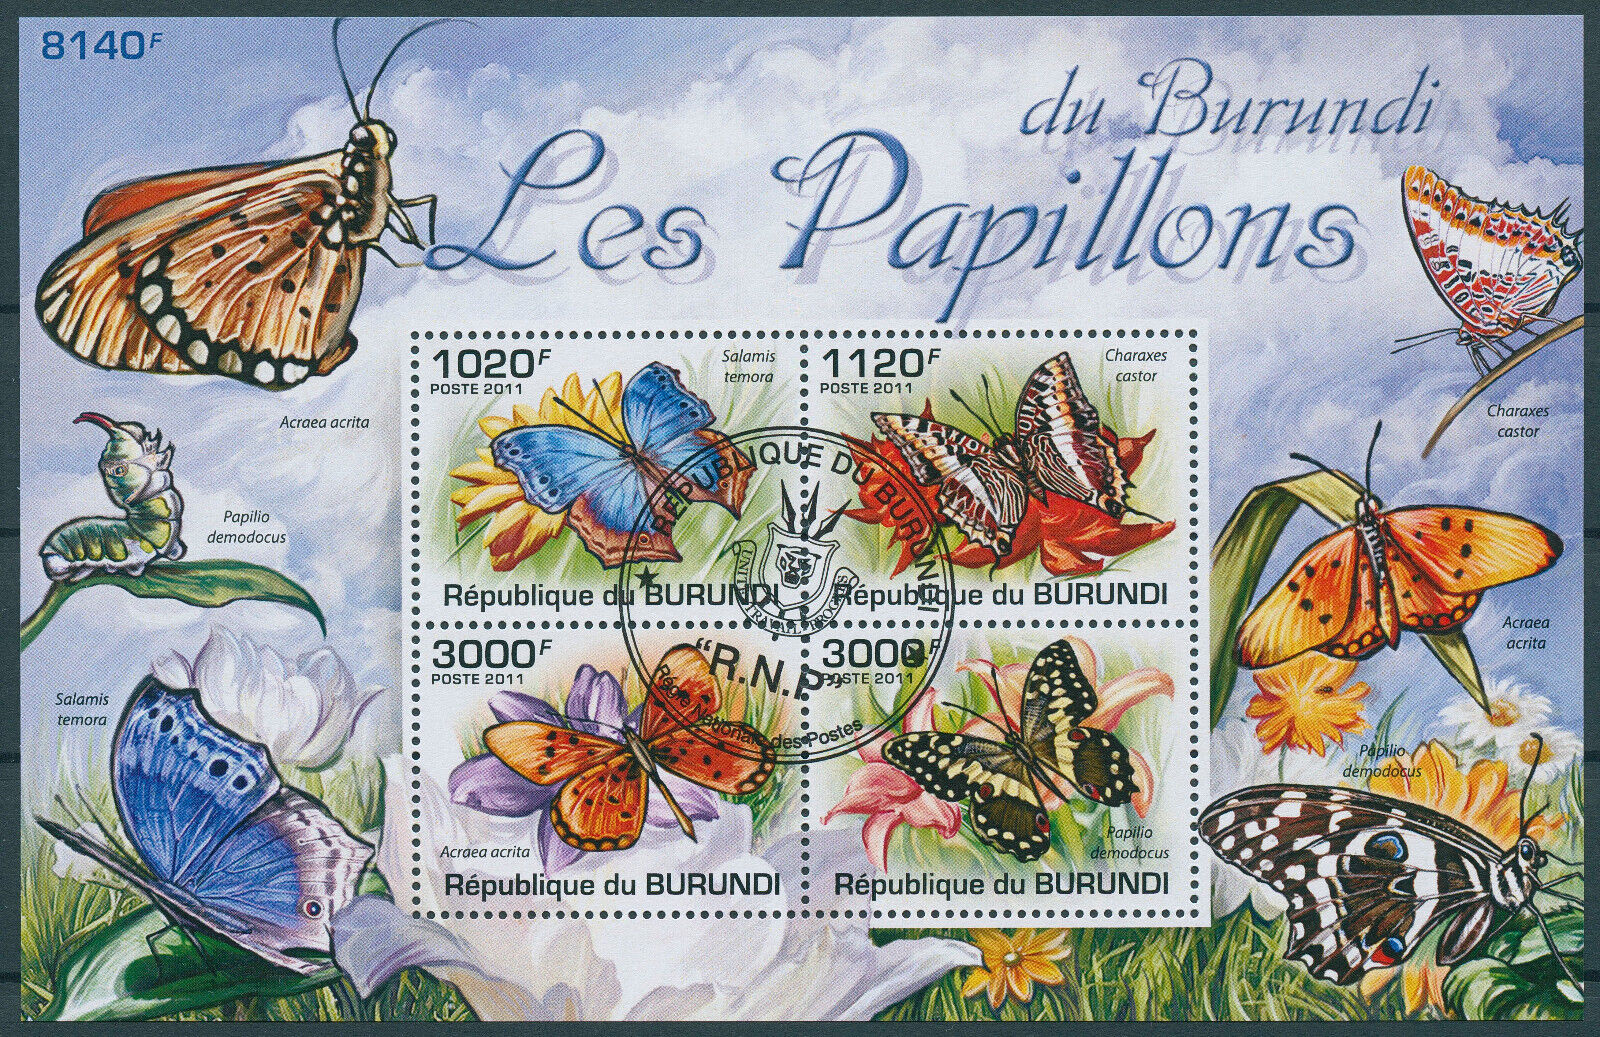 Burundi 2011 CTO Butterflies Stamps Swallowtail Charaxes Butterfly 4v M/S